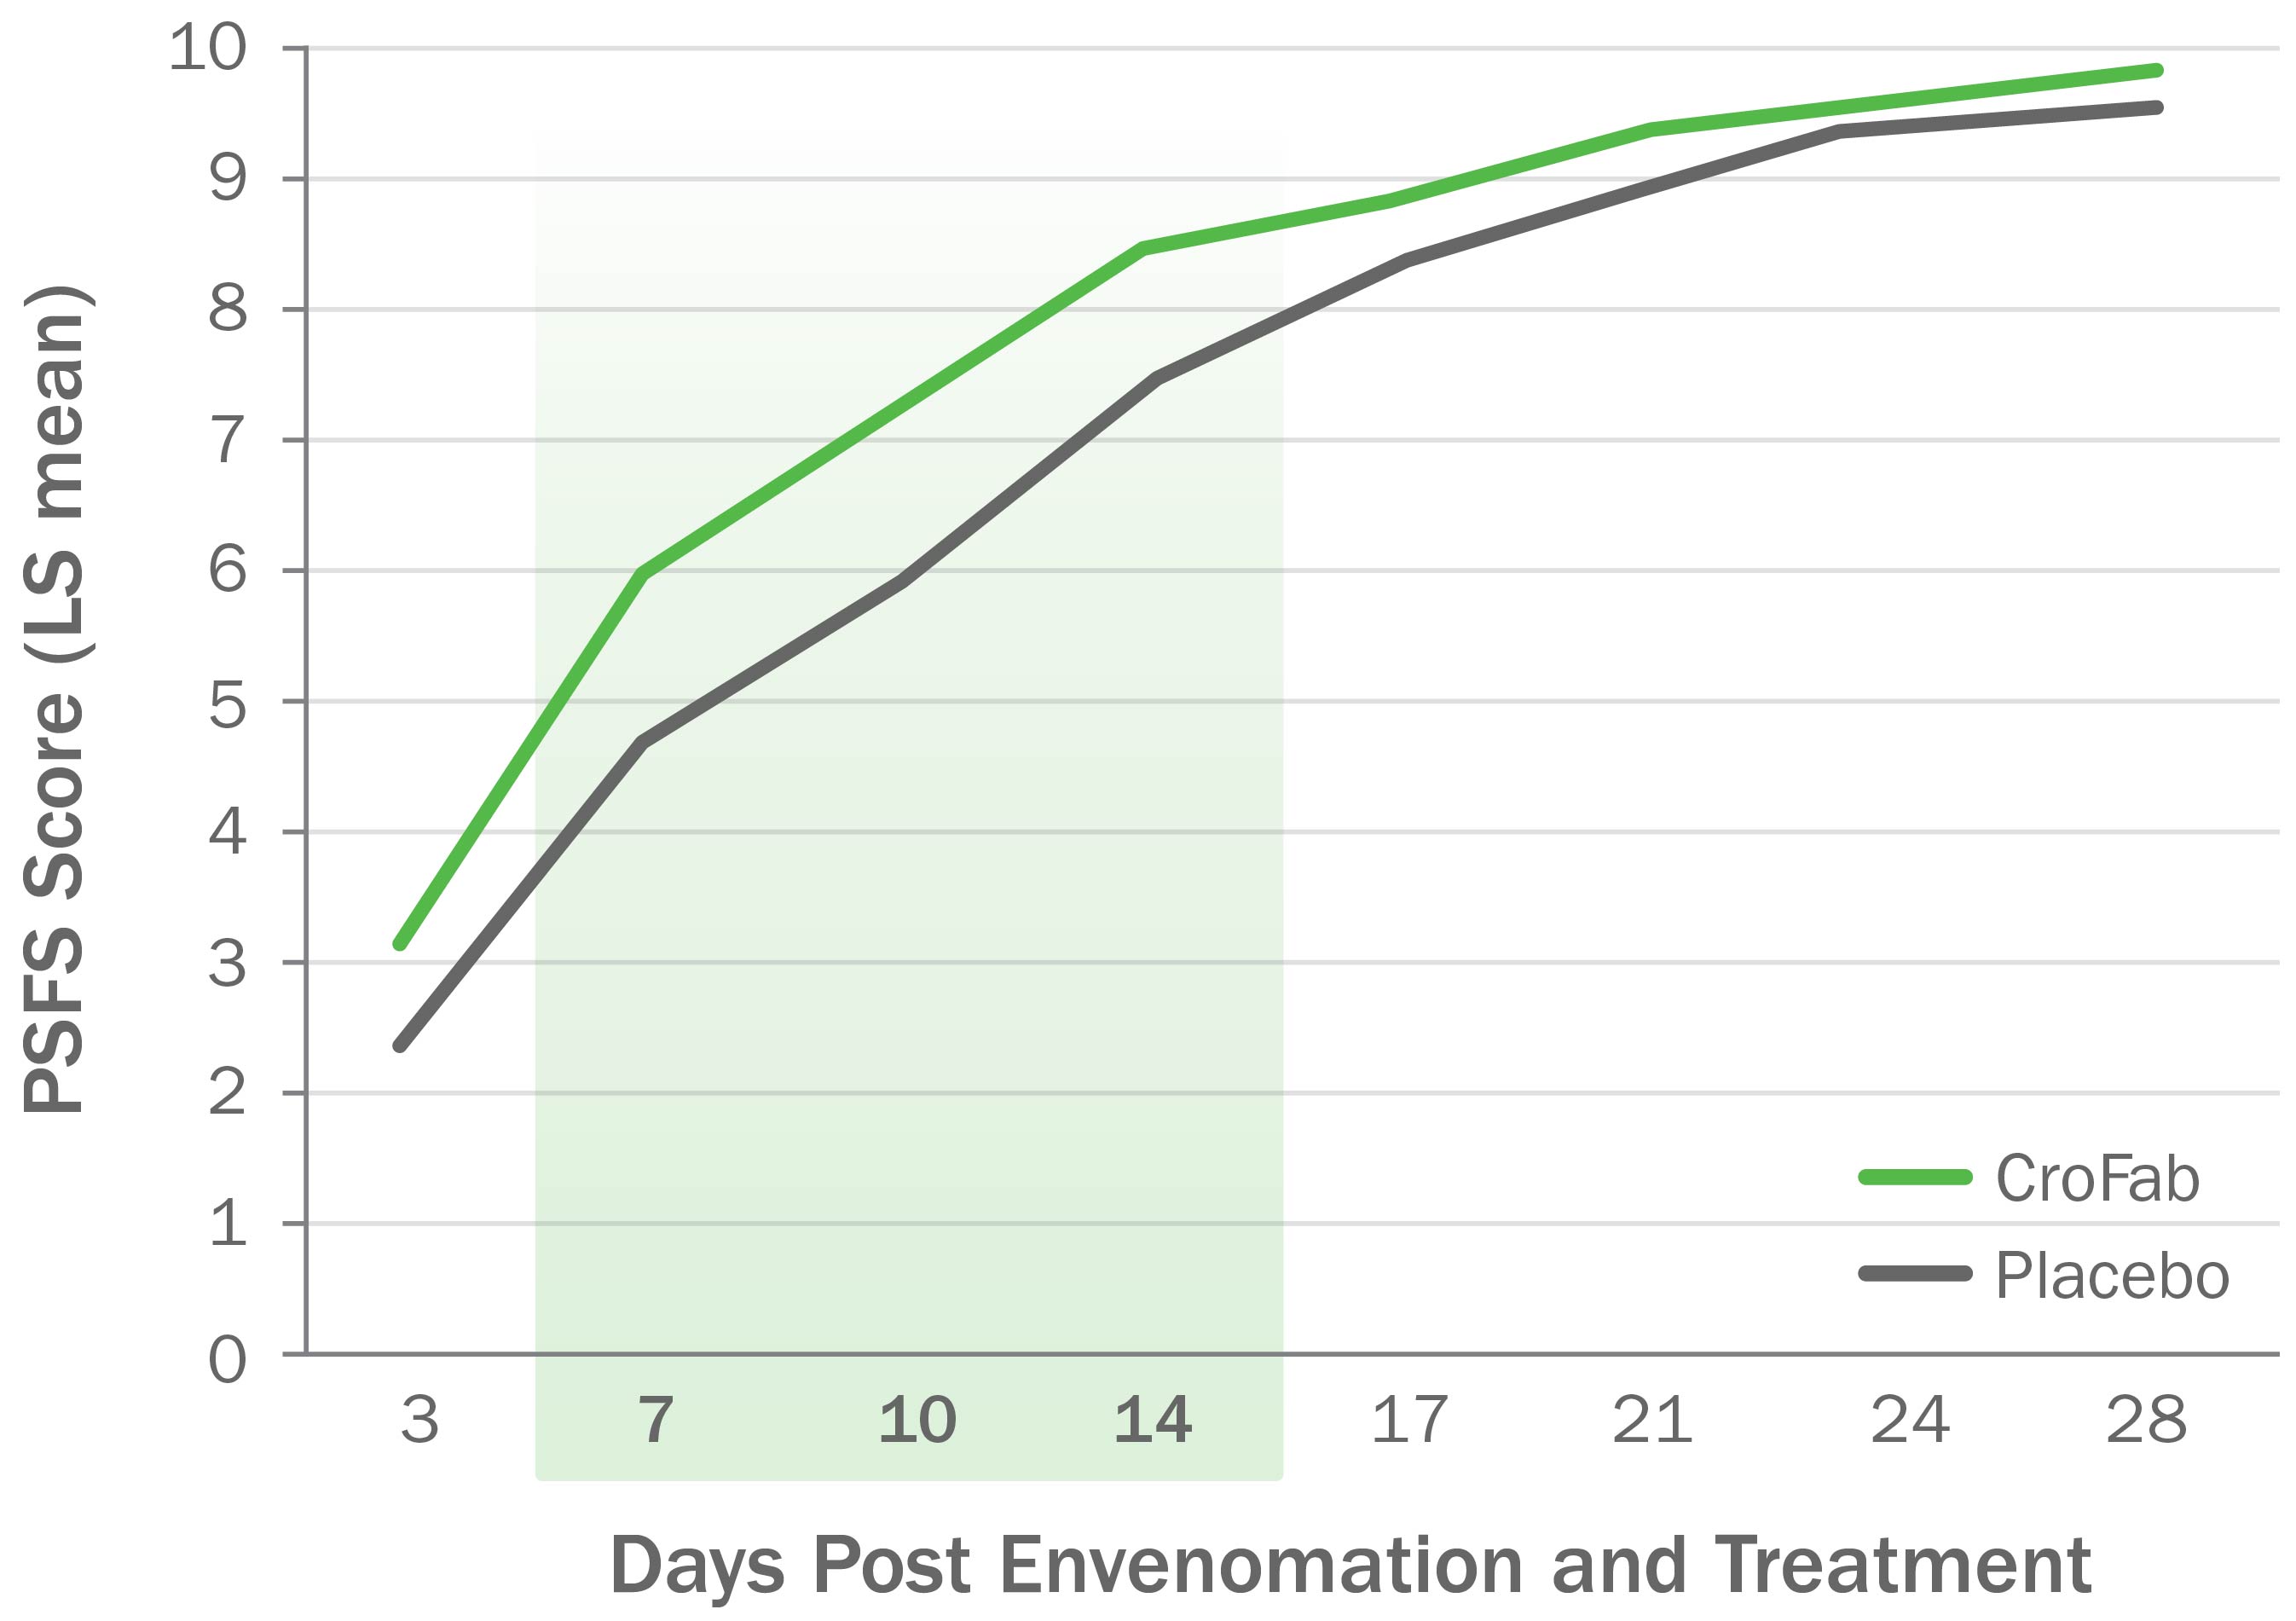 Graph showing improvement in limb function over 28 days with CroFab compared with placebo